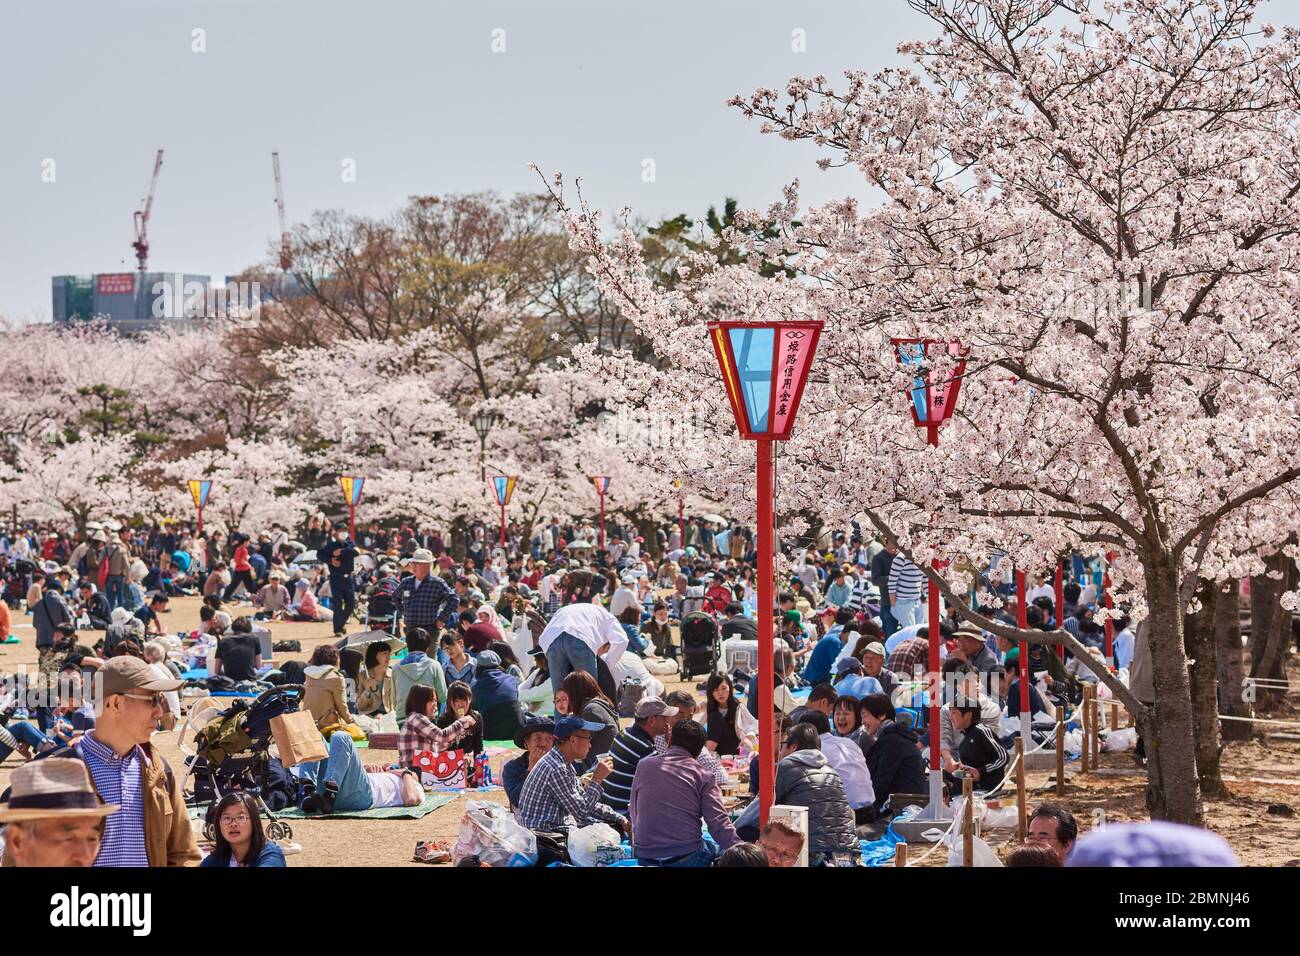 Himeji / Japan - March 31, 2018: People picnicking under blooming cherry blossom trees during the Sakura season in Himeji castle park in Himeji, Japan Stock Photo